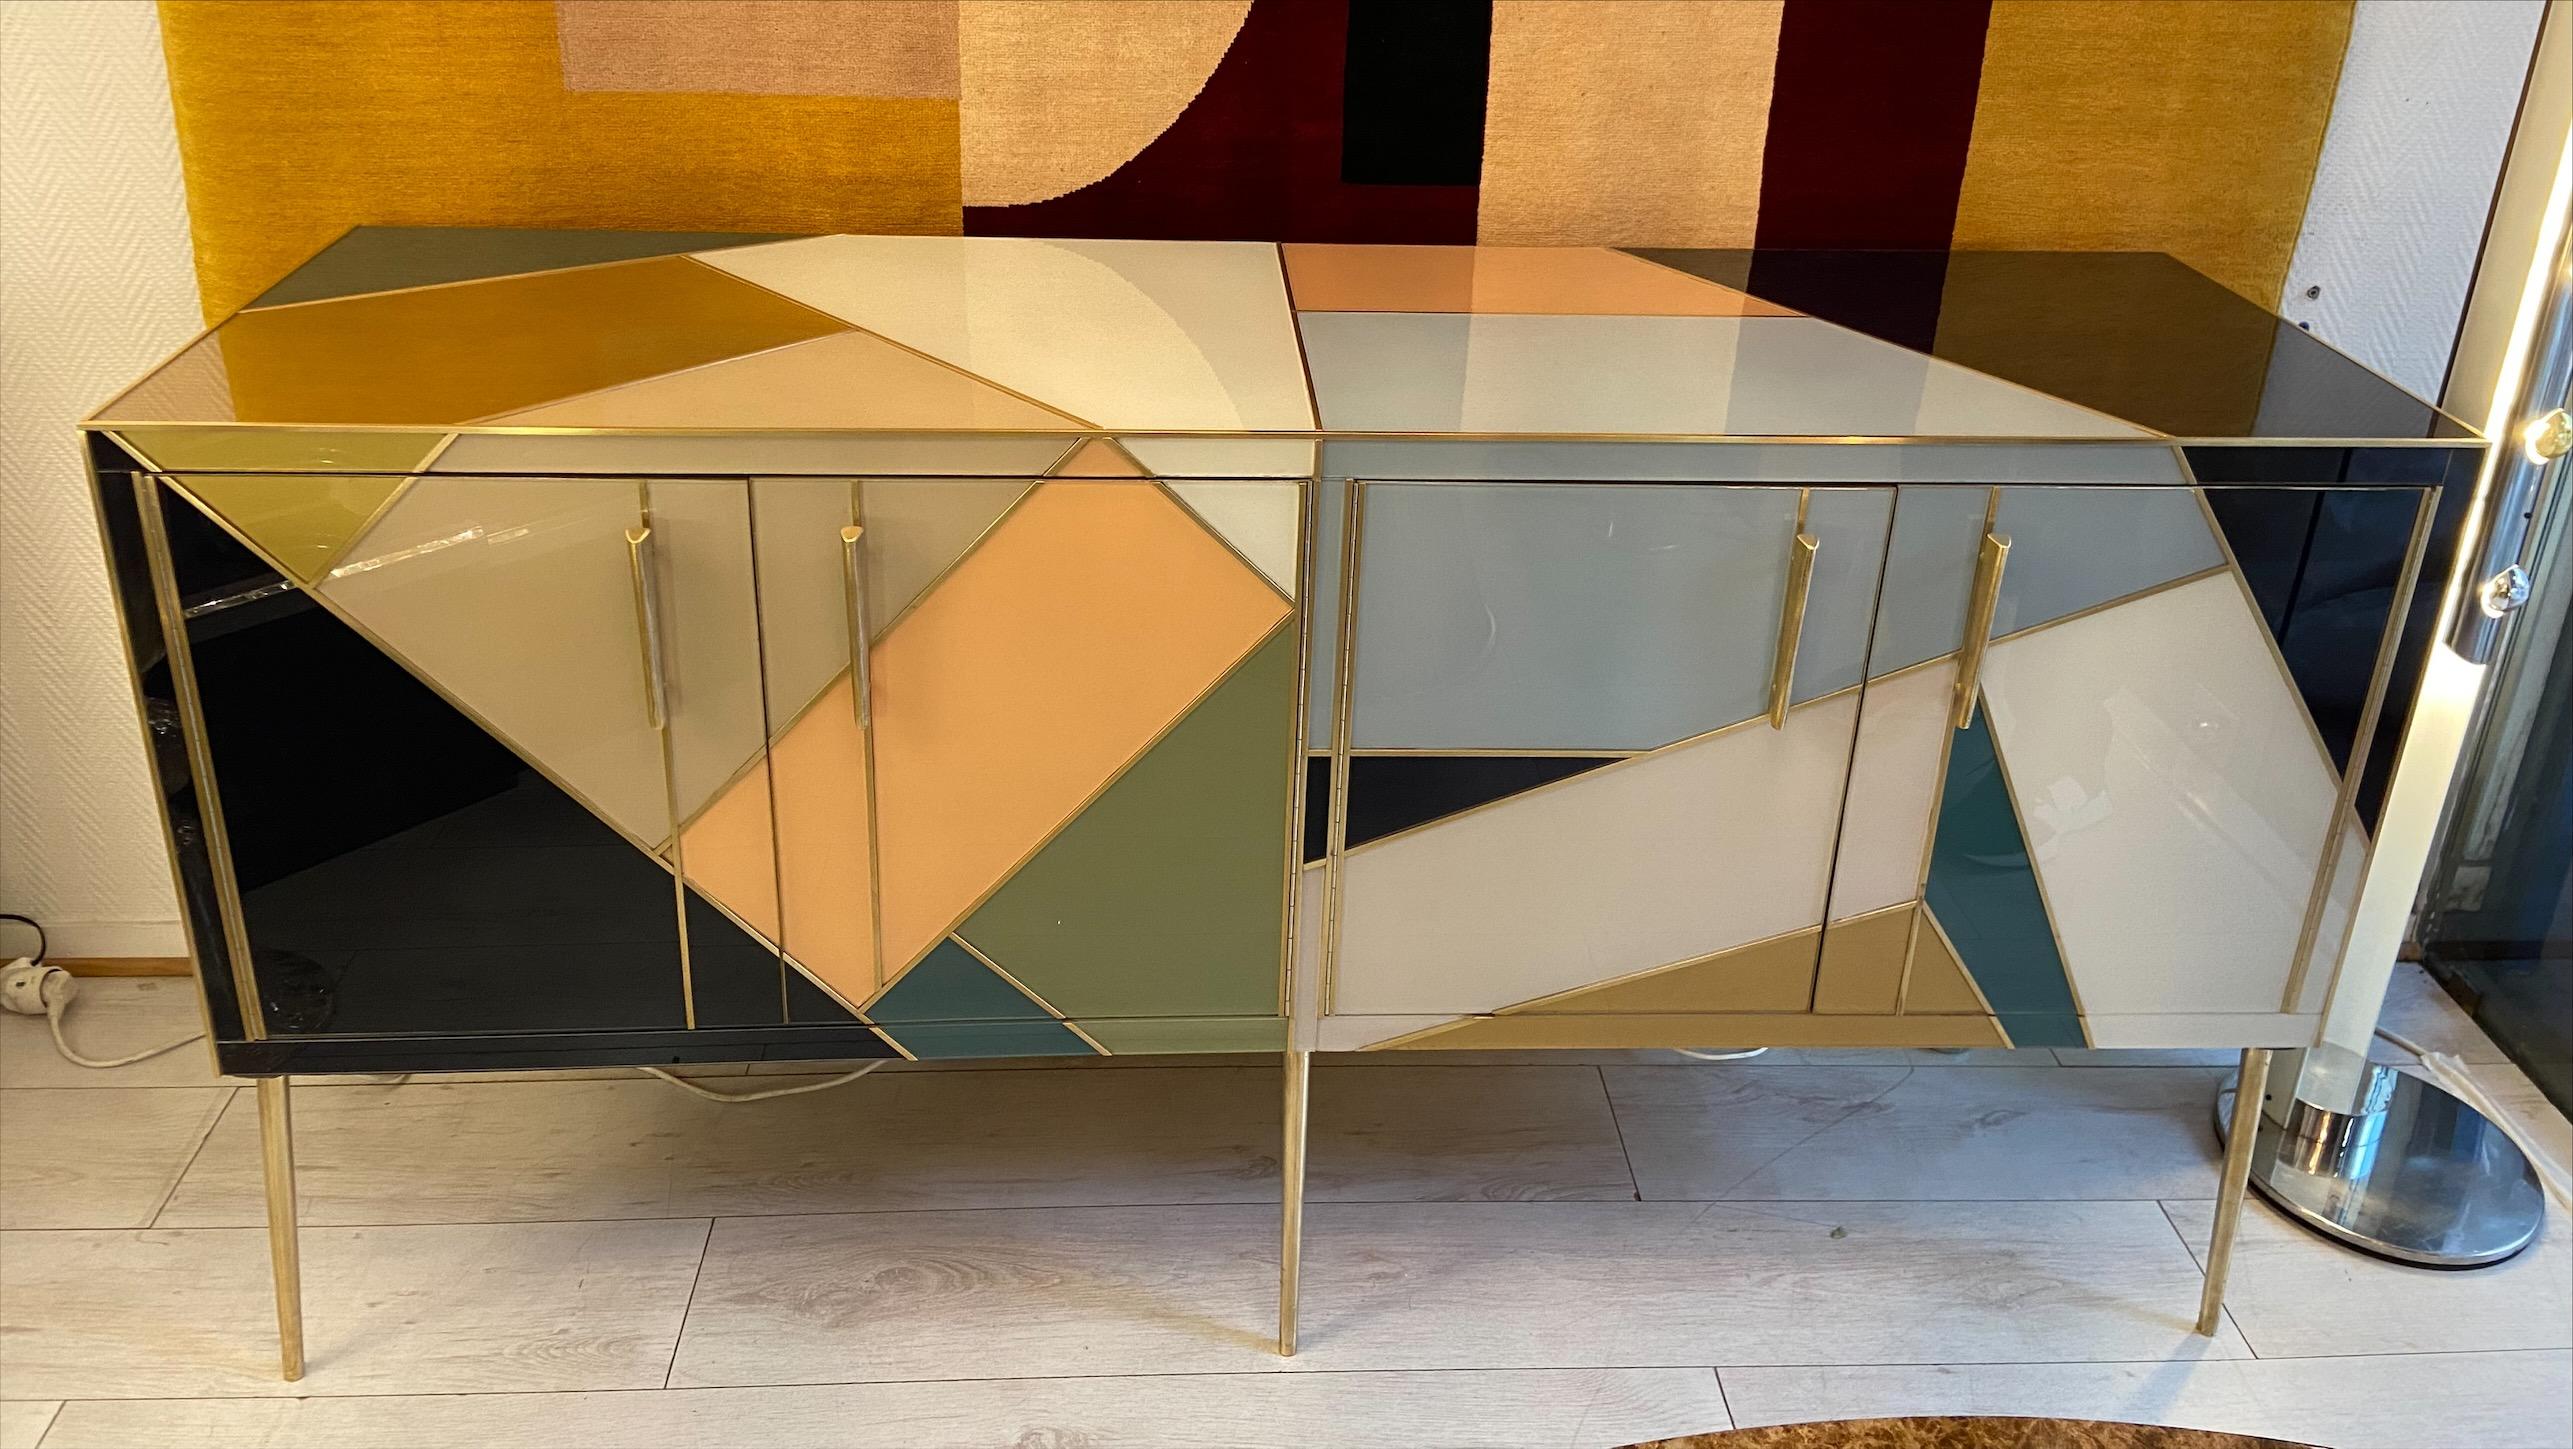 Colored glass sideboard - Northern Italy - Circa 1970
Tinted glass and brass
Warm chromatic colors and
Measures: W 169 x D 49 x H 87cm
Perfect vintage condition.